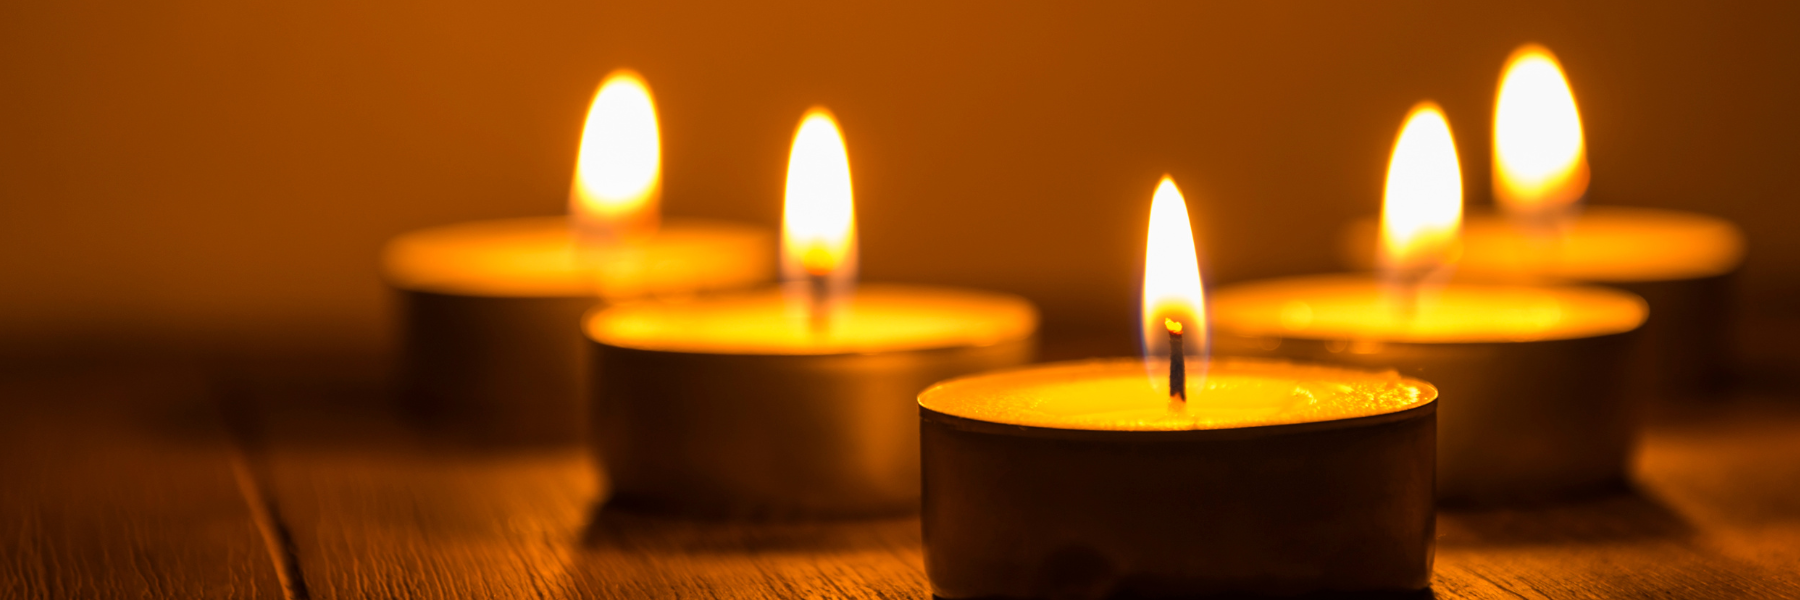 Do candles affect the indoor air?